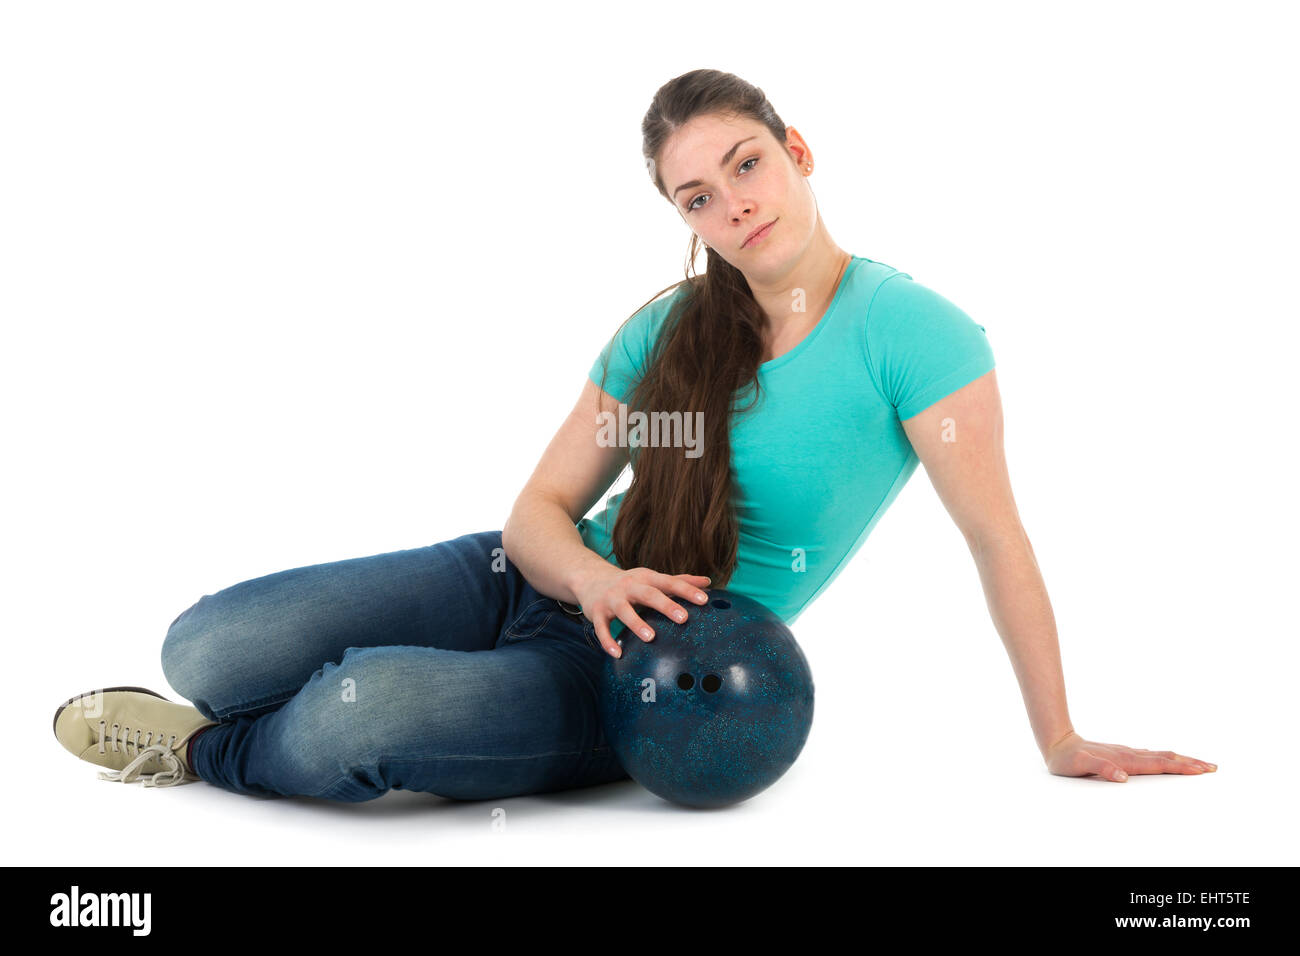 Beautiful woman sitting with a bowling ball, isolated on white background Stock Photo